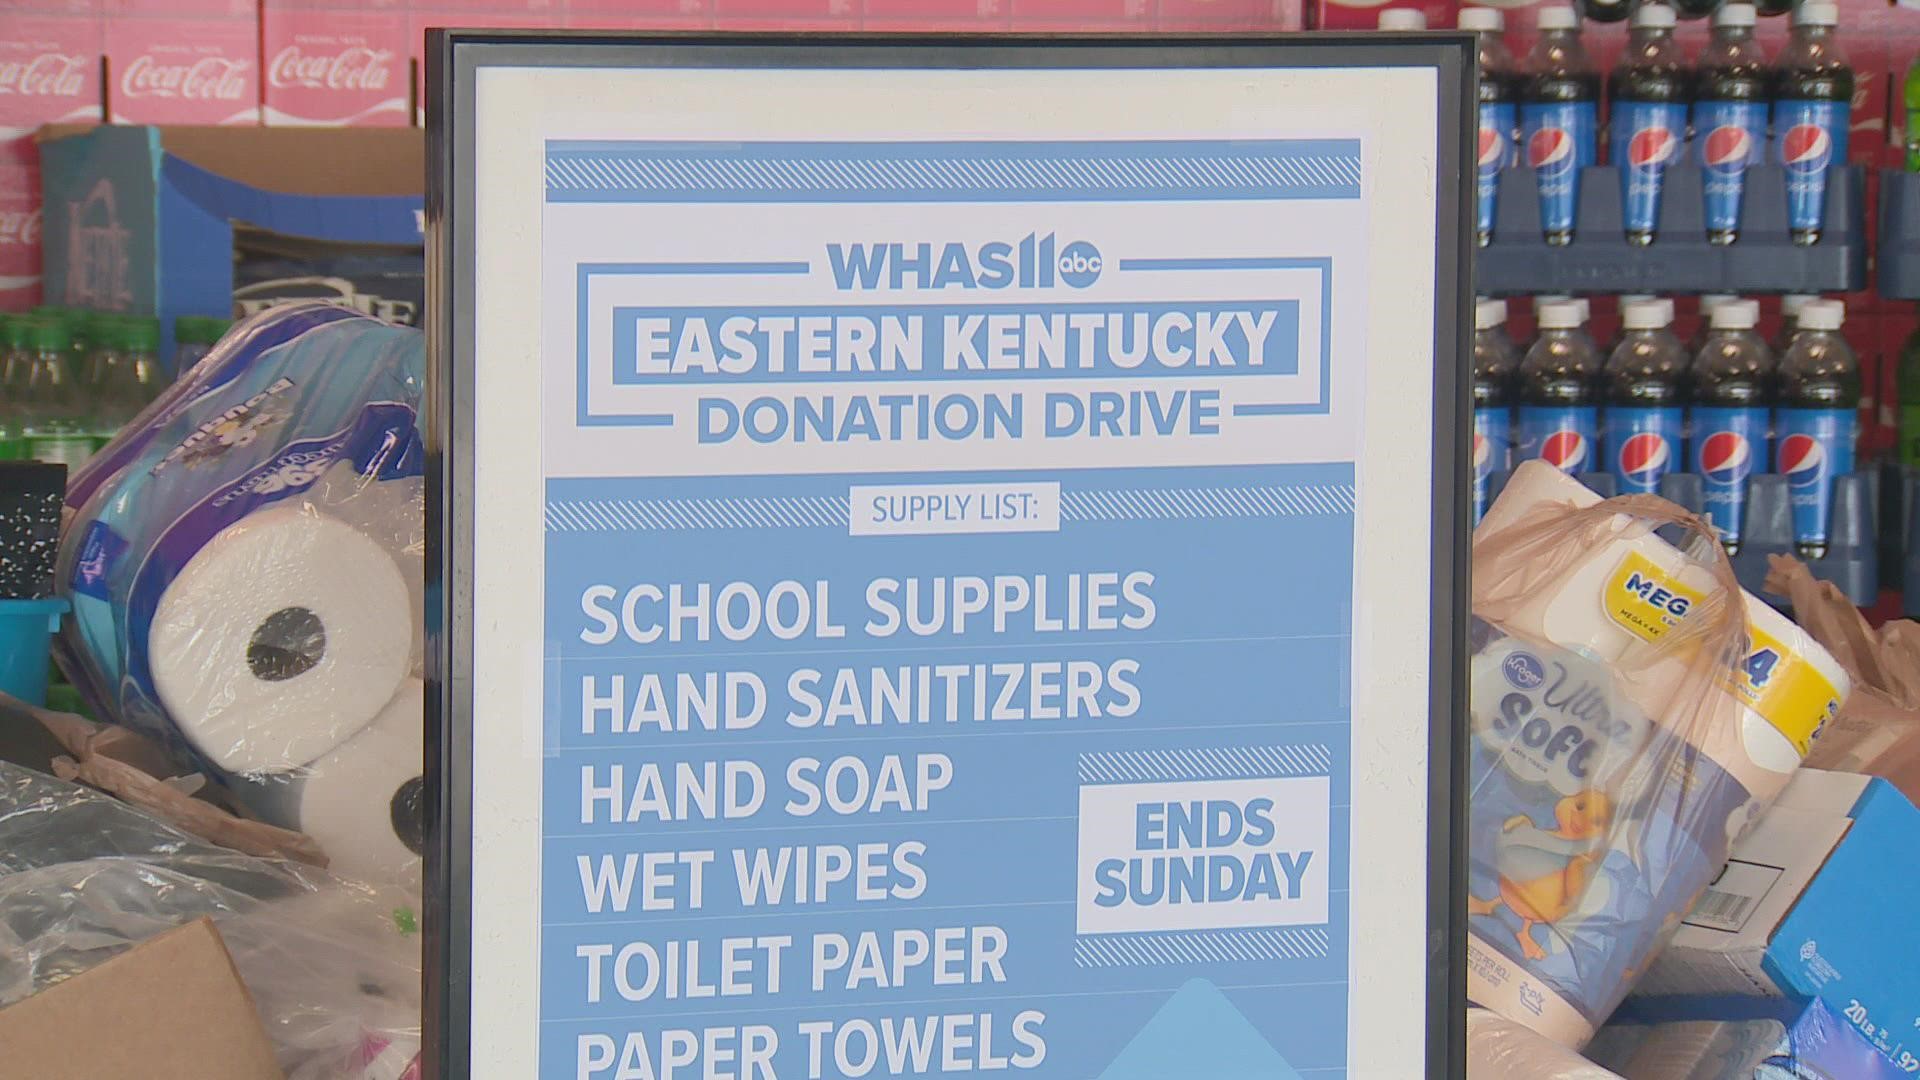 The need is great and Louisville residents have been doing their part in helping families in eastern Kentucky affected by flooding.